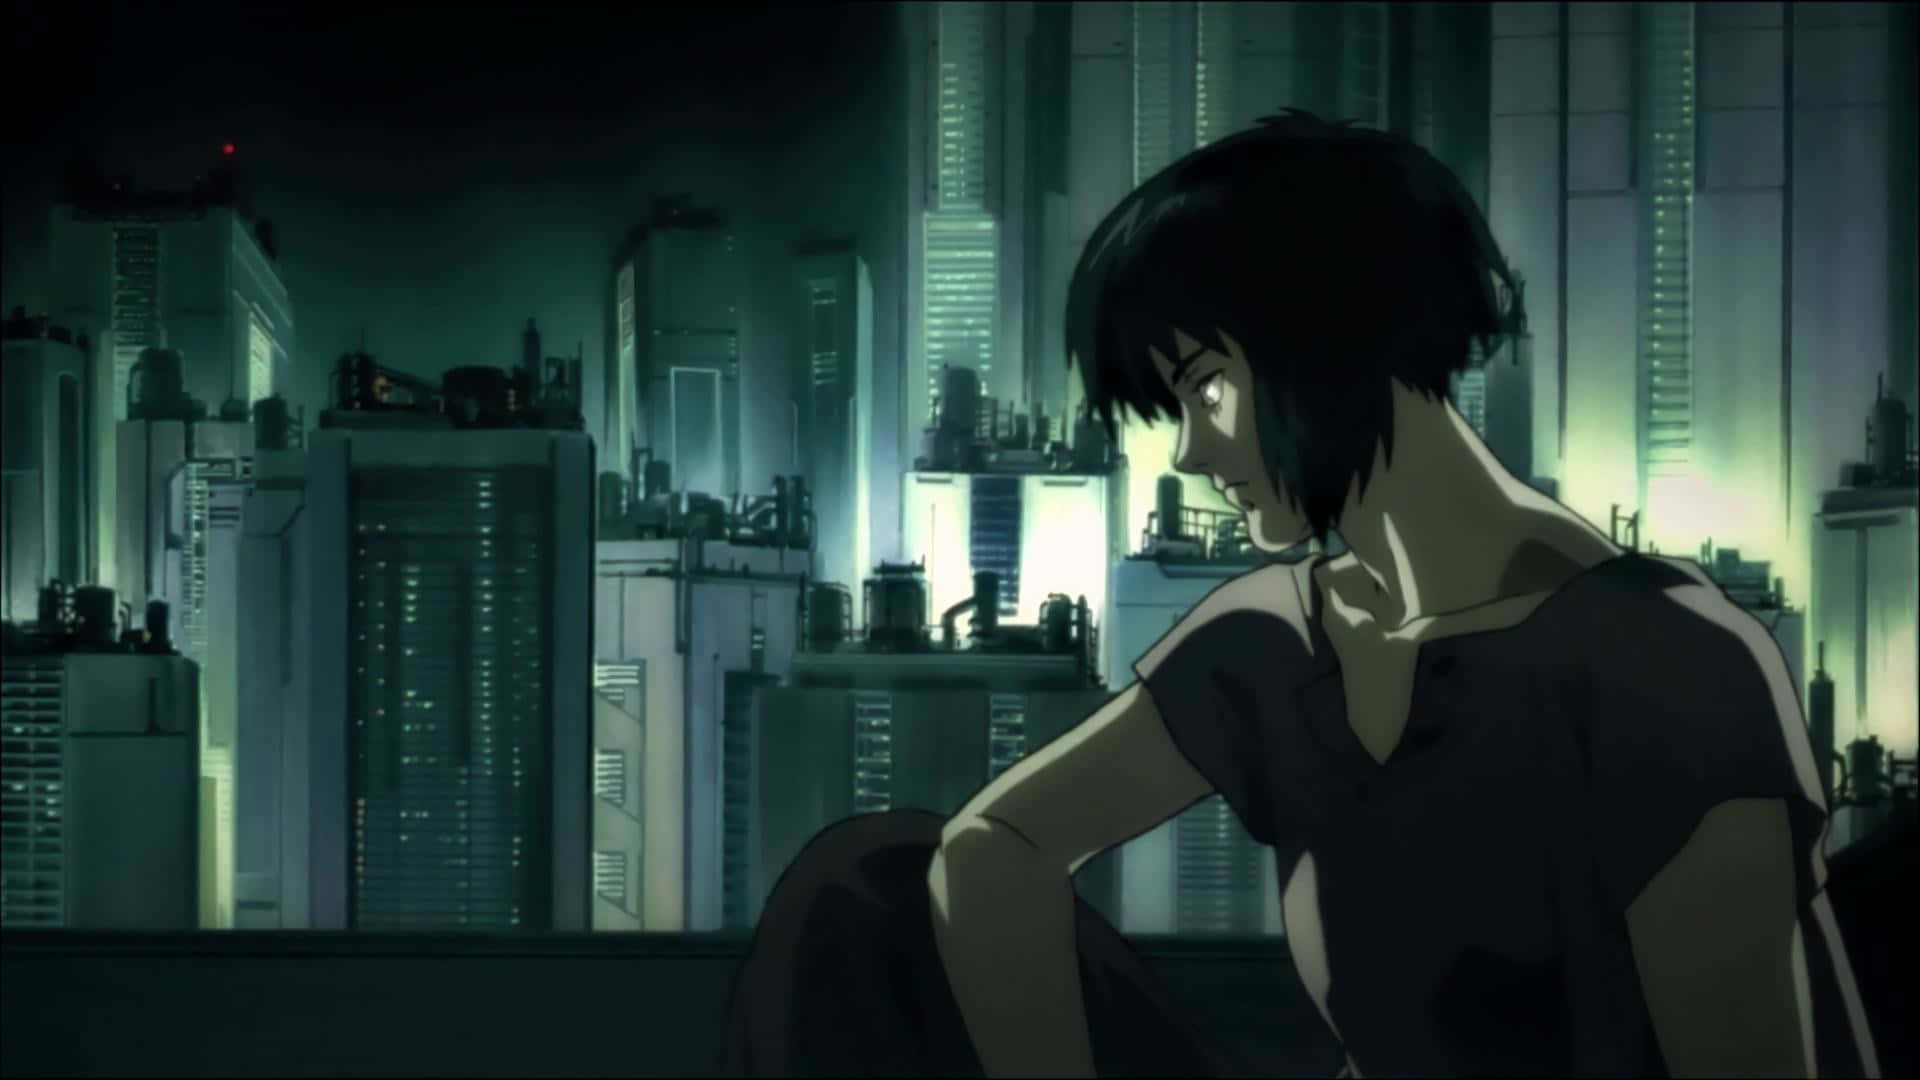 Explore the stunning world of Ghost in the Shell with Logicoma Wallpaper